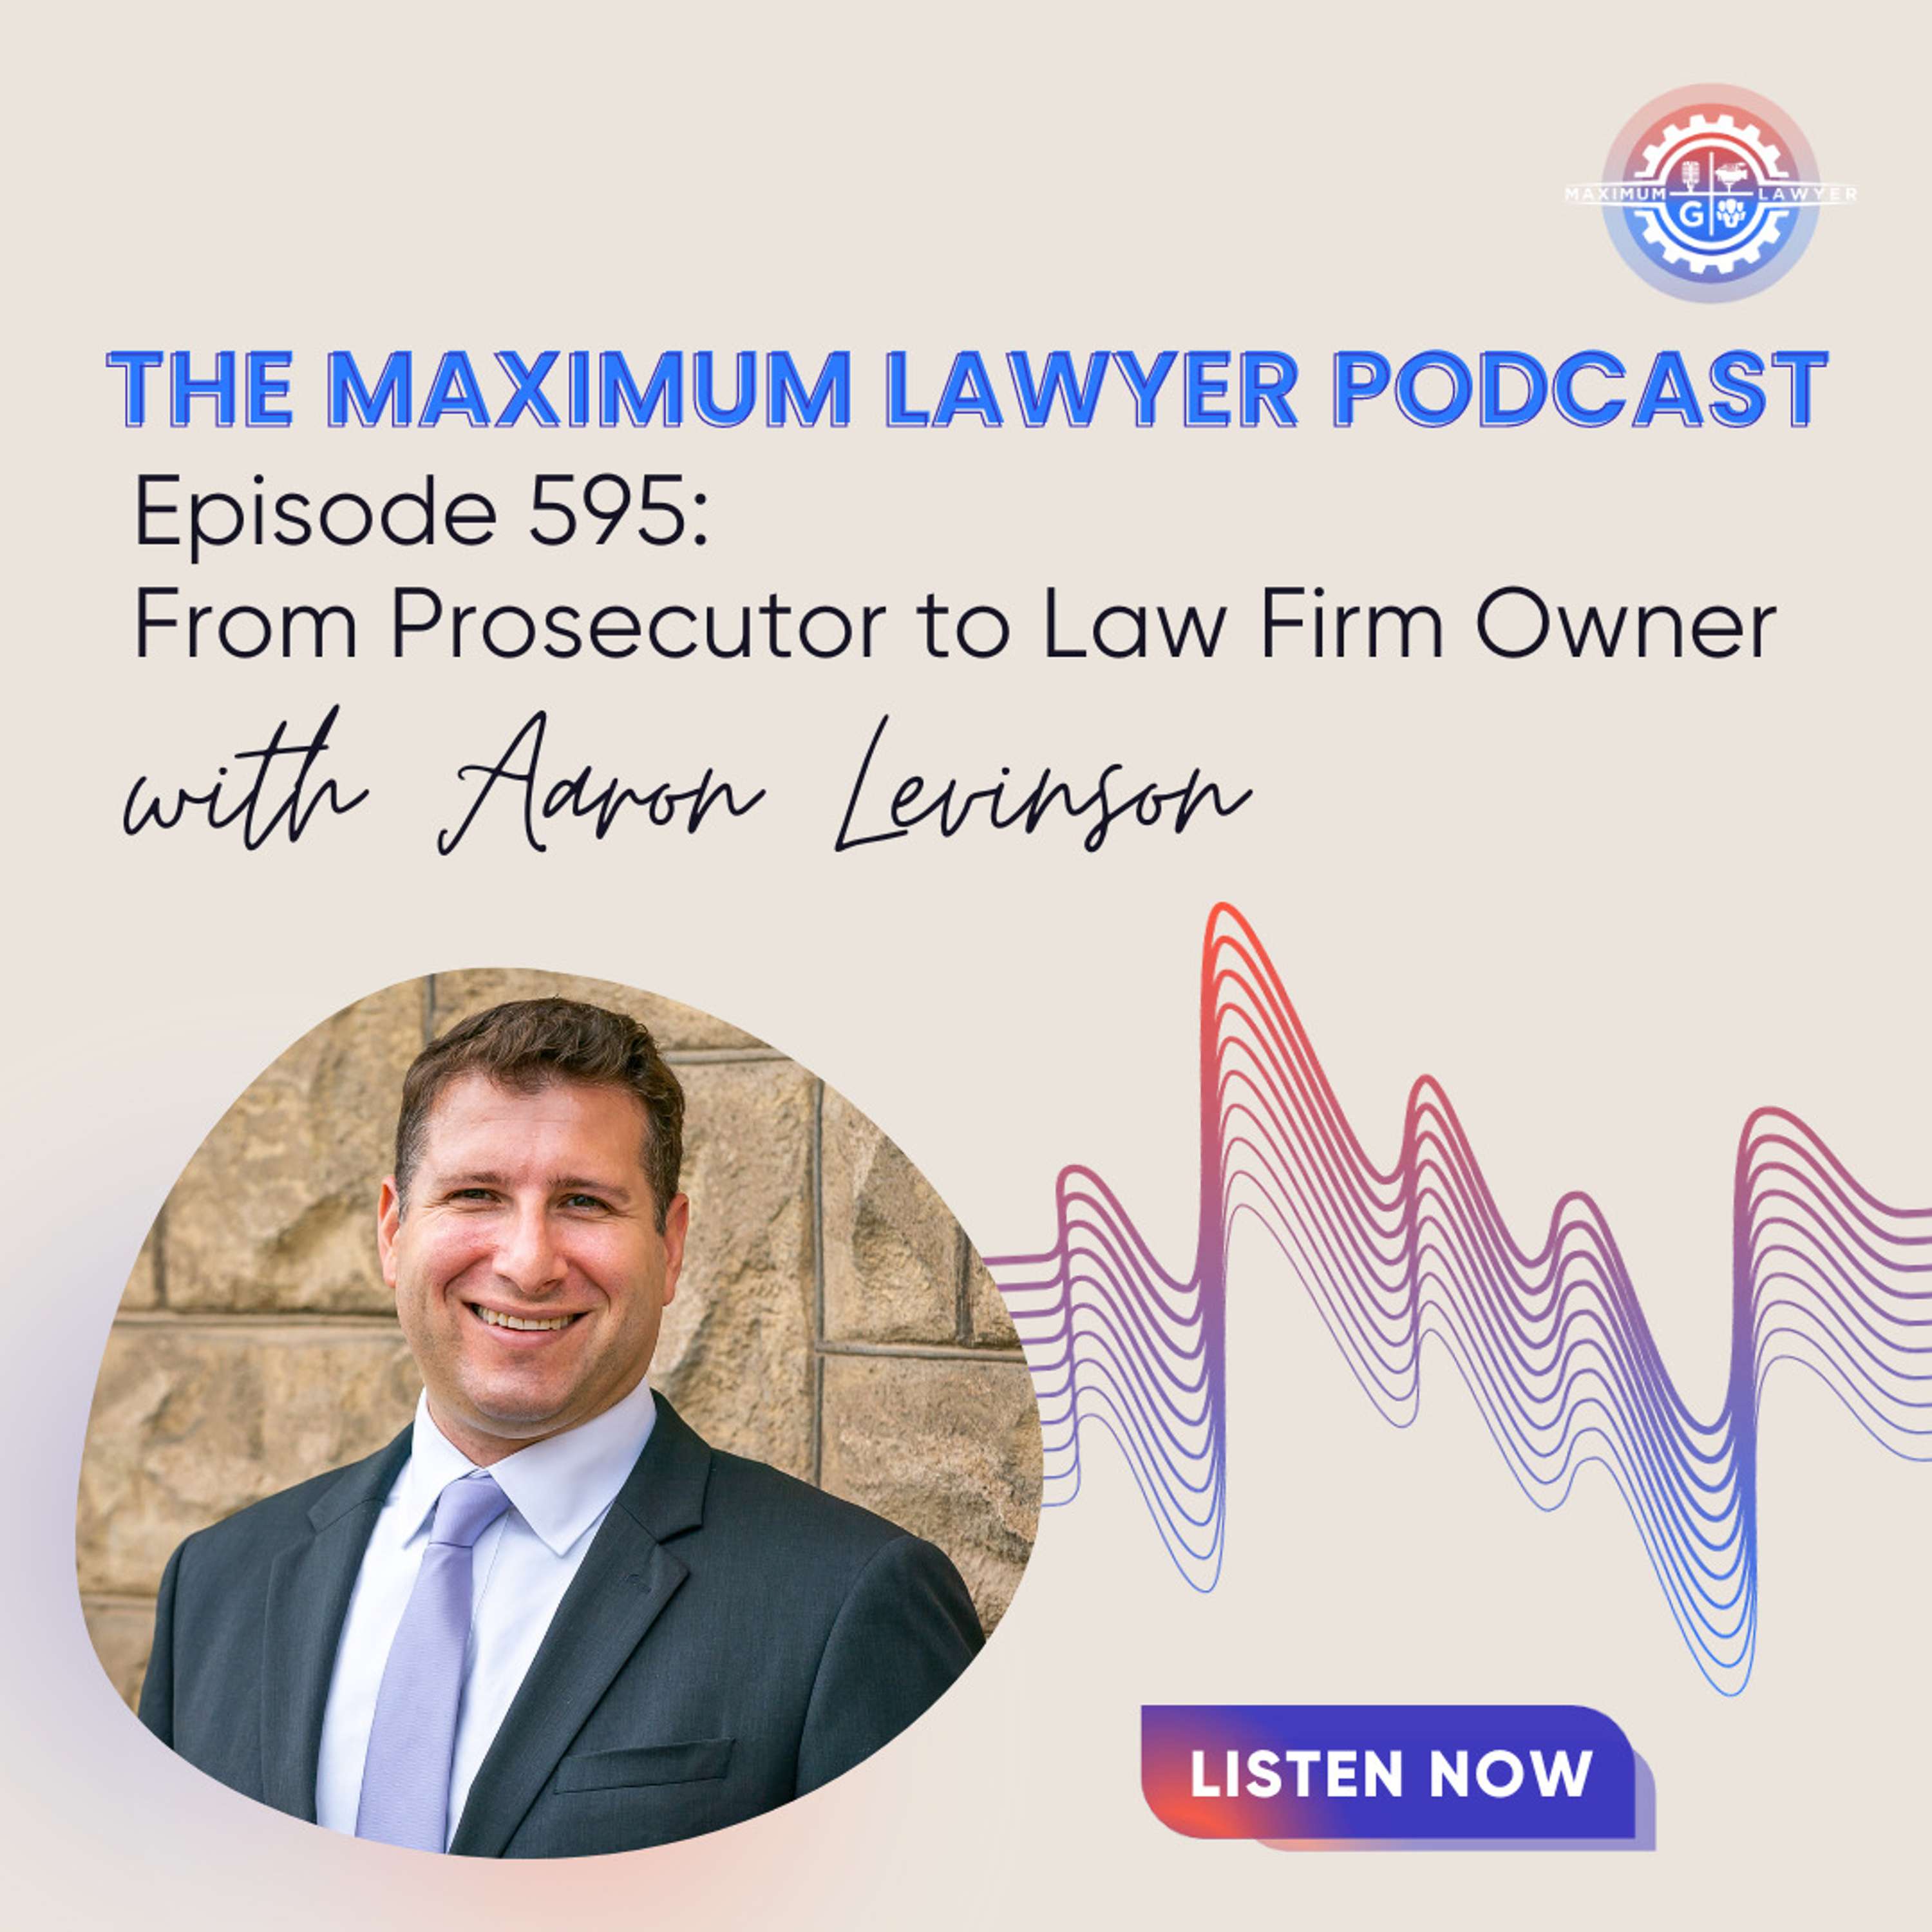 From Prosecutor to Law Firm Owner with Aaron Levinson